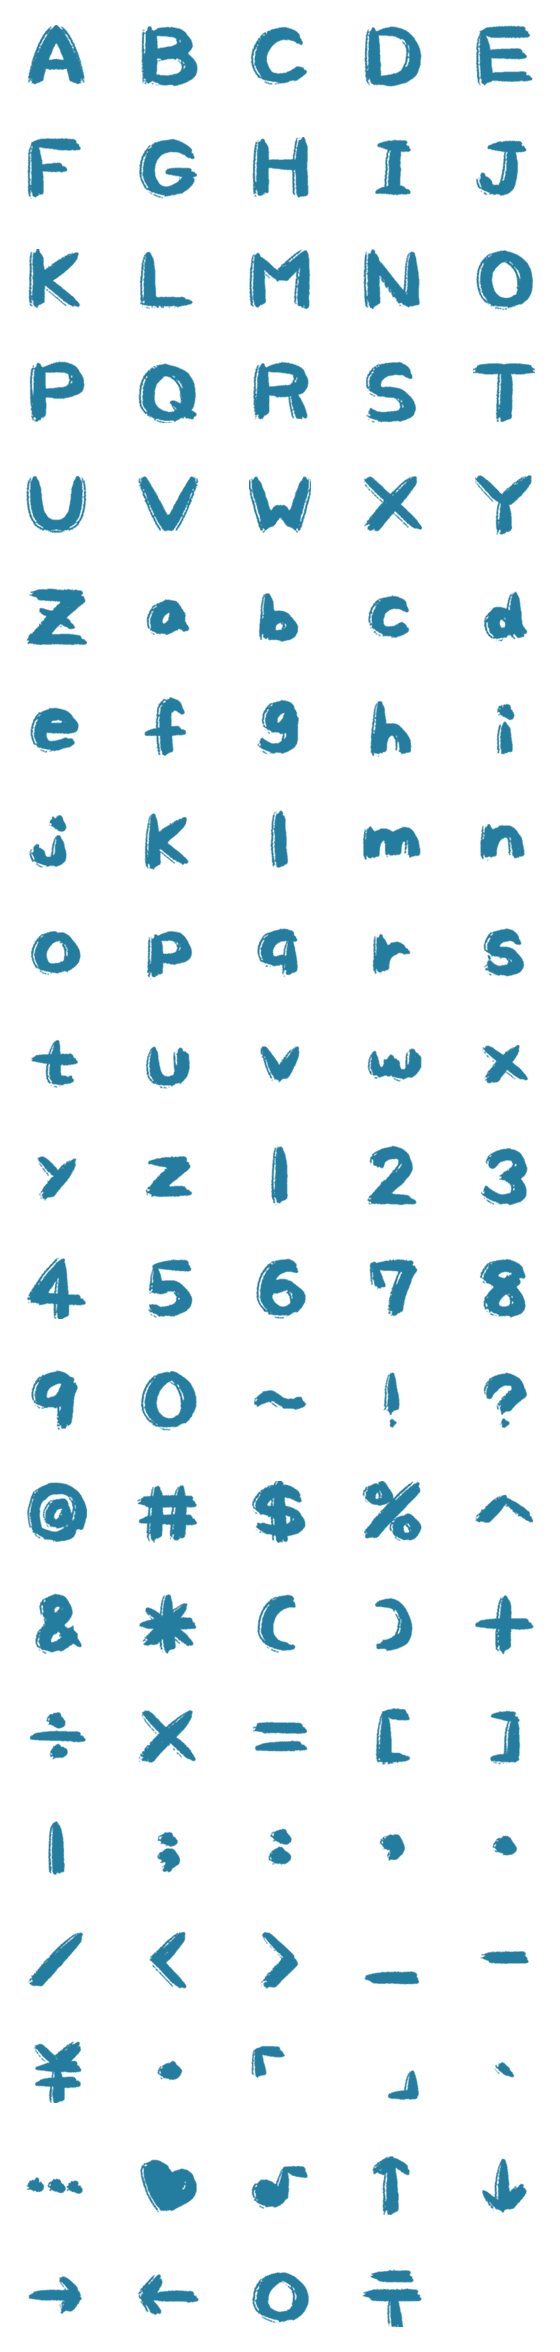 [LINE絵文字]SEATTLE SPRUCE Letter number symbolsの画像一覧